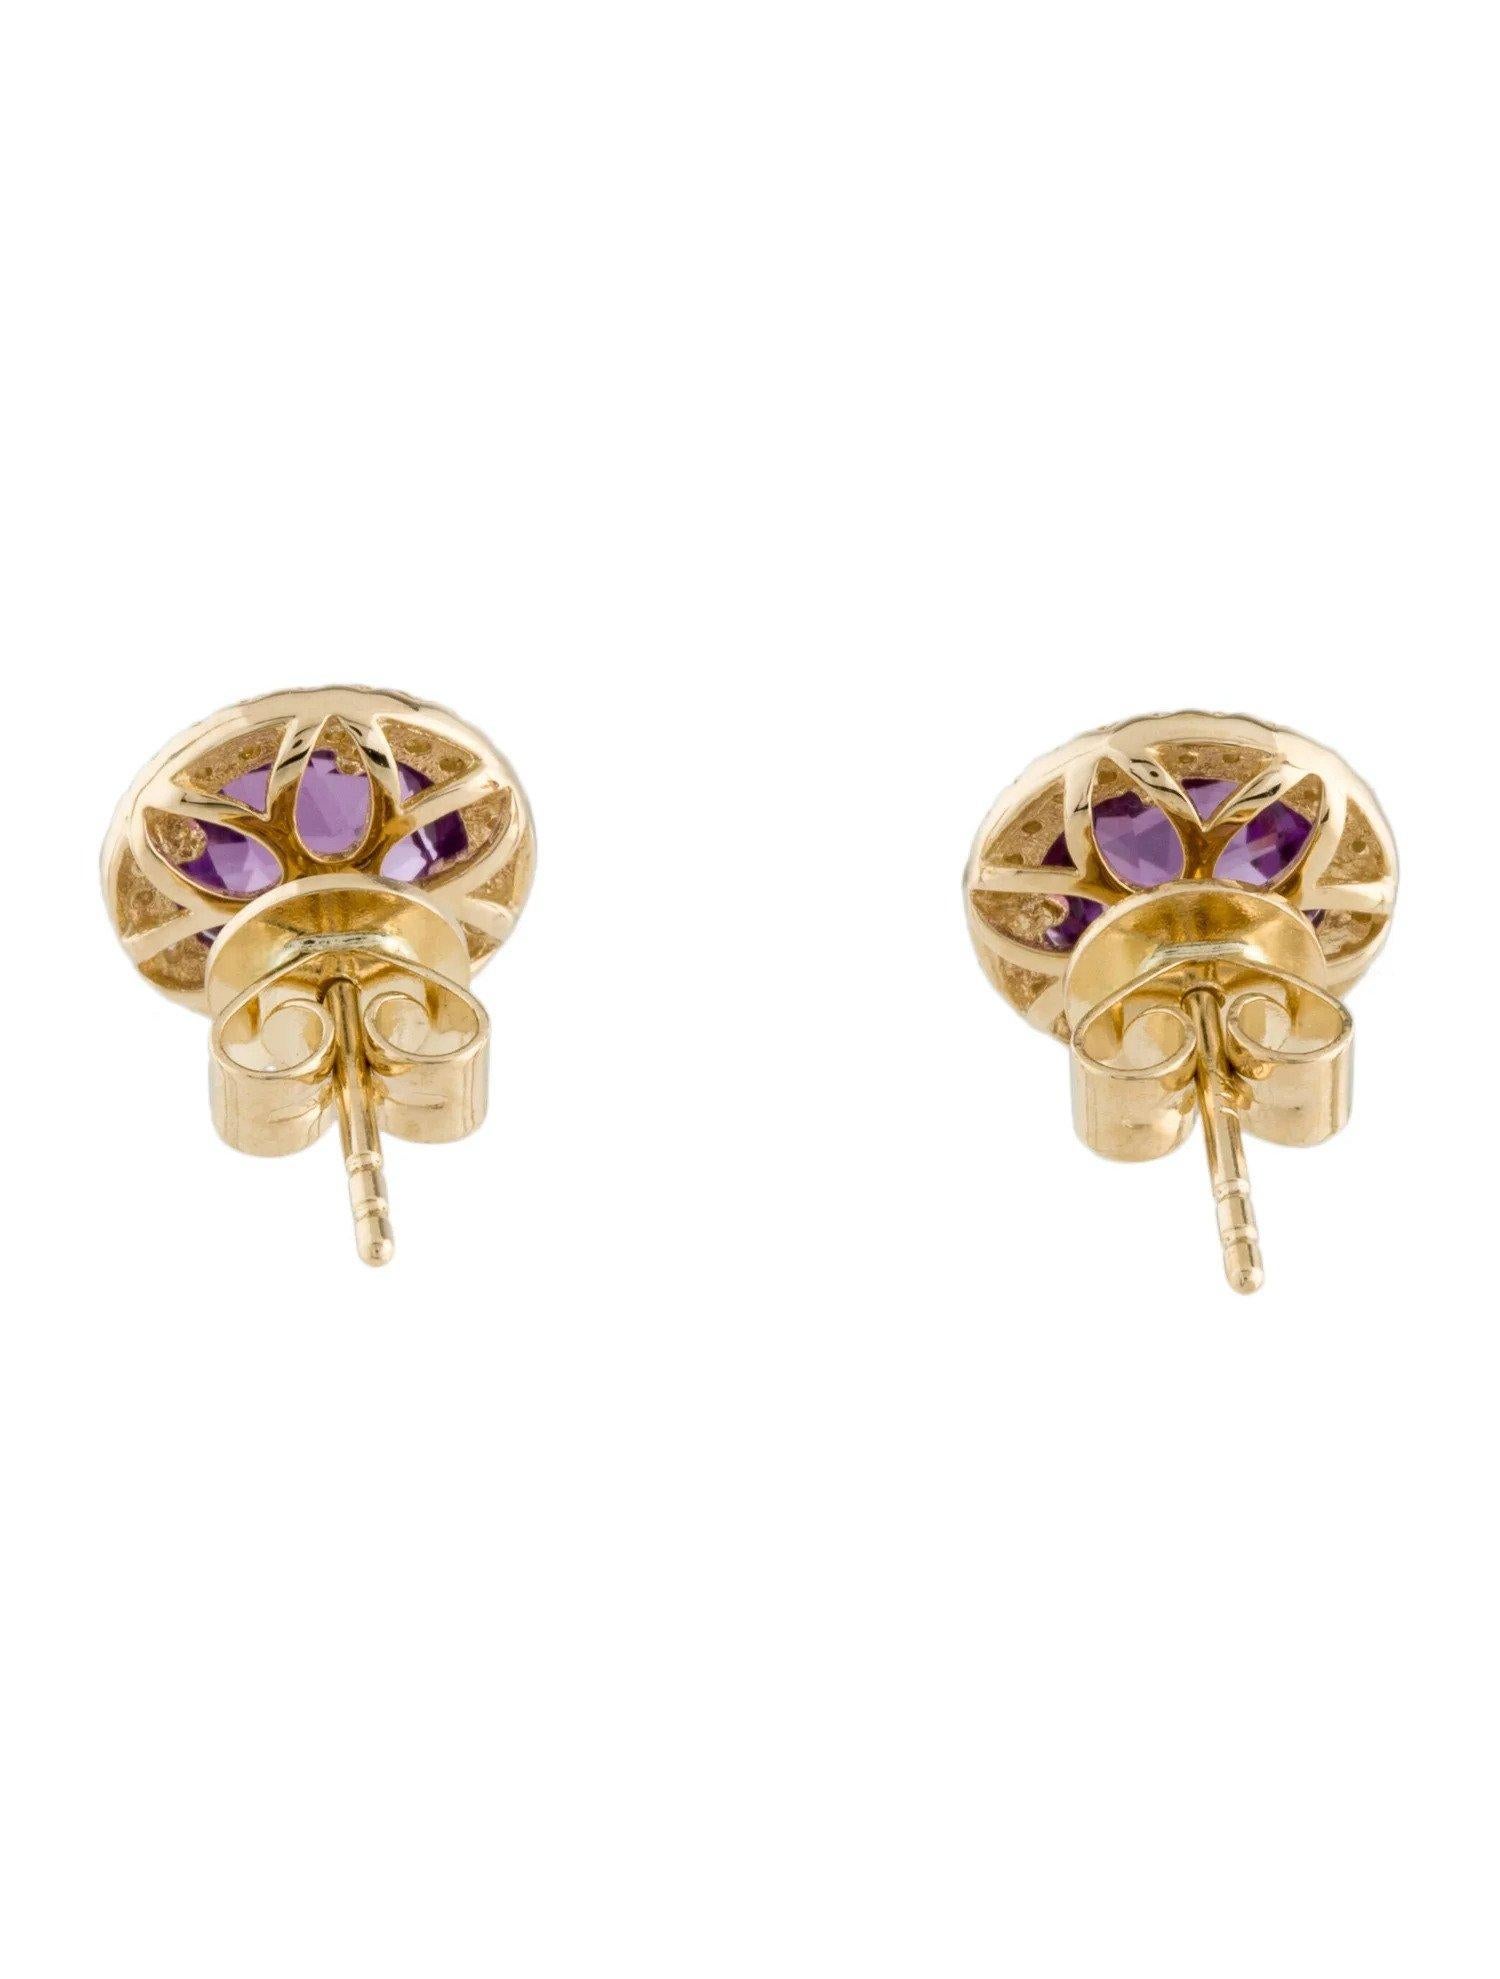 1.86 Carat Round Amethyst & Diamond Yellow Gold Stud Earrings In New Condition For Sale In Great Neck, NY